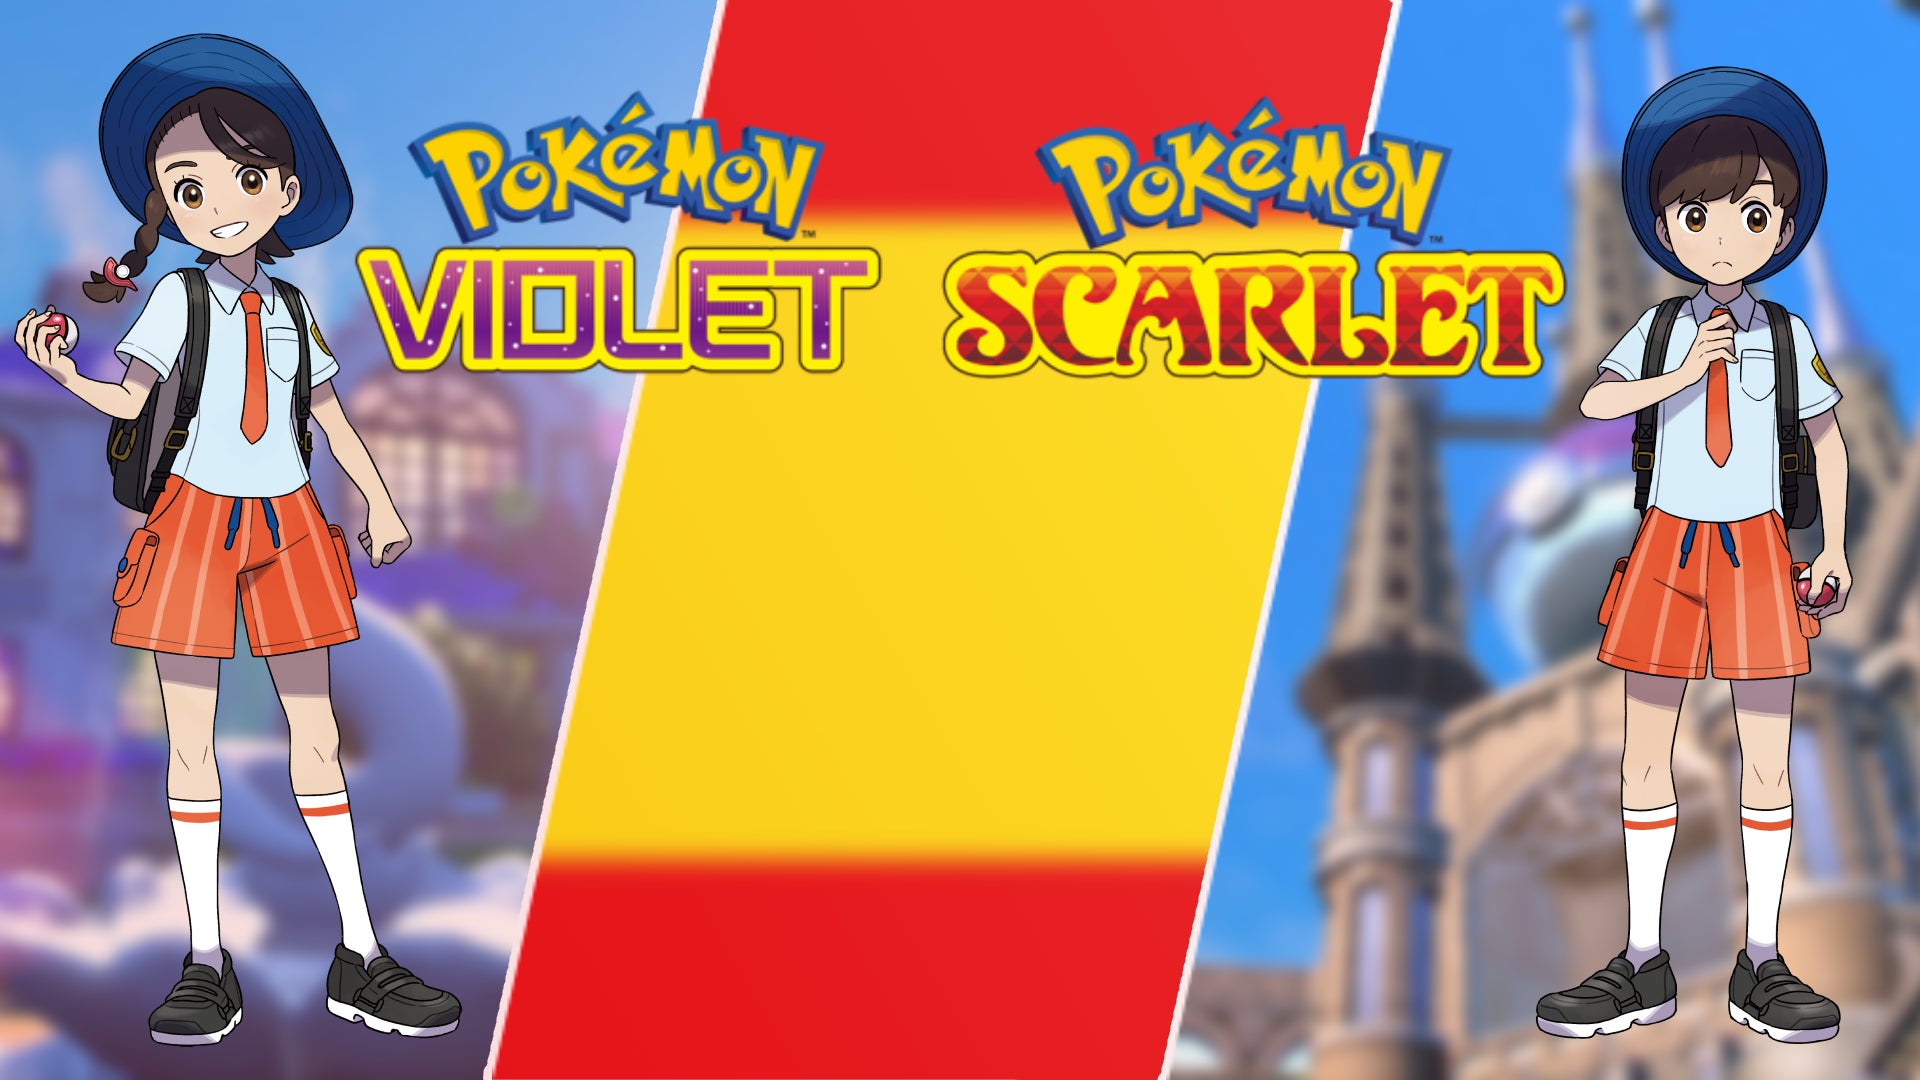 Pokemon Scarlet and Violet: The coolest, funniest and weirdest stuff  Spanish Trainers have spotted so far | VG247